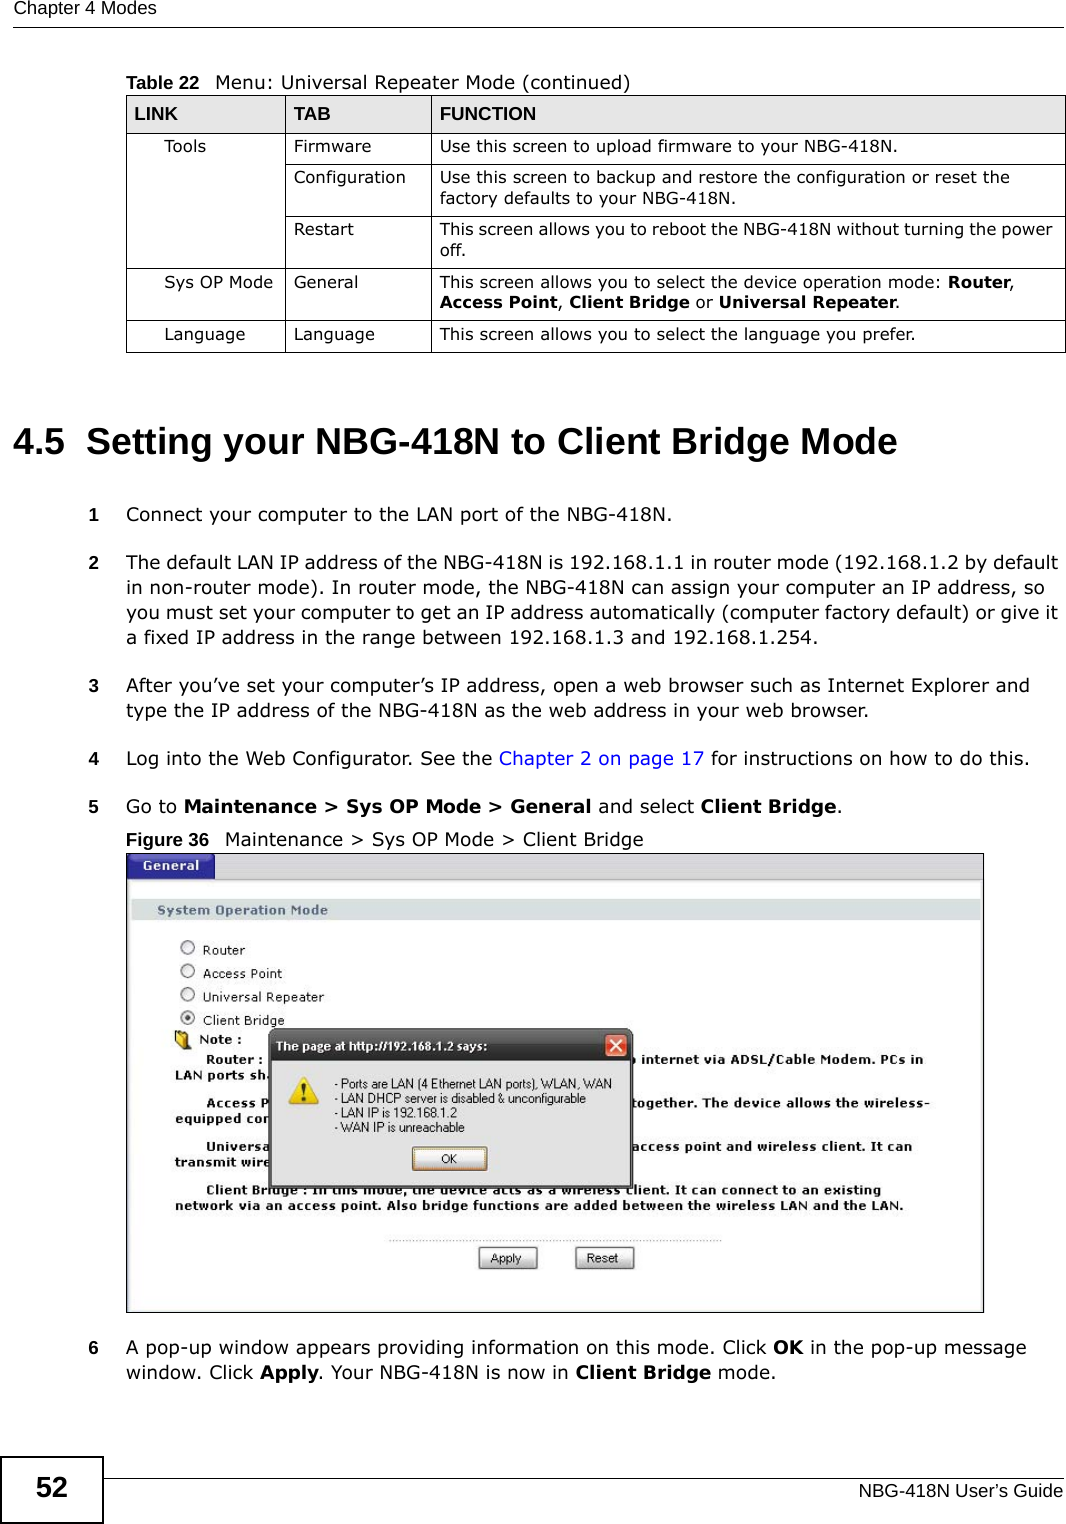 Chapter 4 ModesNBG-418N User’s Guide524.5  Setting your NBG-418N to Client Bridge Mode1Connect your computer to the LAN port of the NBG-418N. 2The default LAN IP address of the NBG-418N is 192.168.1.1 in router mode (192.168.1.2 by default in non-router mode). In router mode, the NBG-418N can assign your computer an IP address, so you must set your computer to get an IP address automatically (computer factory default) or give it a fixed IP address in the range between 192.168.1.3 and 192.168.1.254.3After you’ve set your computer’s IP address, open a web browser such as Internet Explorer and type the IP address of the NBG-418N as the web address in your web browser.4Log into the Web Configurator. See the Chapter 2 on page 17 for instructions on how to do this.5Go to Maintenance &gt; Sys OP Mode &gt; General and select Client Bridge.Figure 36   Maintenance &gt; Sys OP Mode &gt; Client Bridge 6A pop-up window appears providing information on this mode. Click OK in the pop-up message window. Click Apply. Your NBG-418N is now in Client Bridge mode.Tools Firmware Use this screen to upload firmware to your NBG-418N.Configuration Use this screen to backup and restore the configuration or reset the factory defaults to your NBG-418N. Restart This screen allows you to reboot the NBG-418N without turning the power off.Sys OP Mode General This screen allows you to select the device operation mode: Router, Access Point, Client Bridge or Universal Repeater.Language Language This screen allows you to select the language you prefer.Table 22   Menu: Universal Repeater Mode (continued)LINK TAB FUNCTION